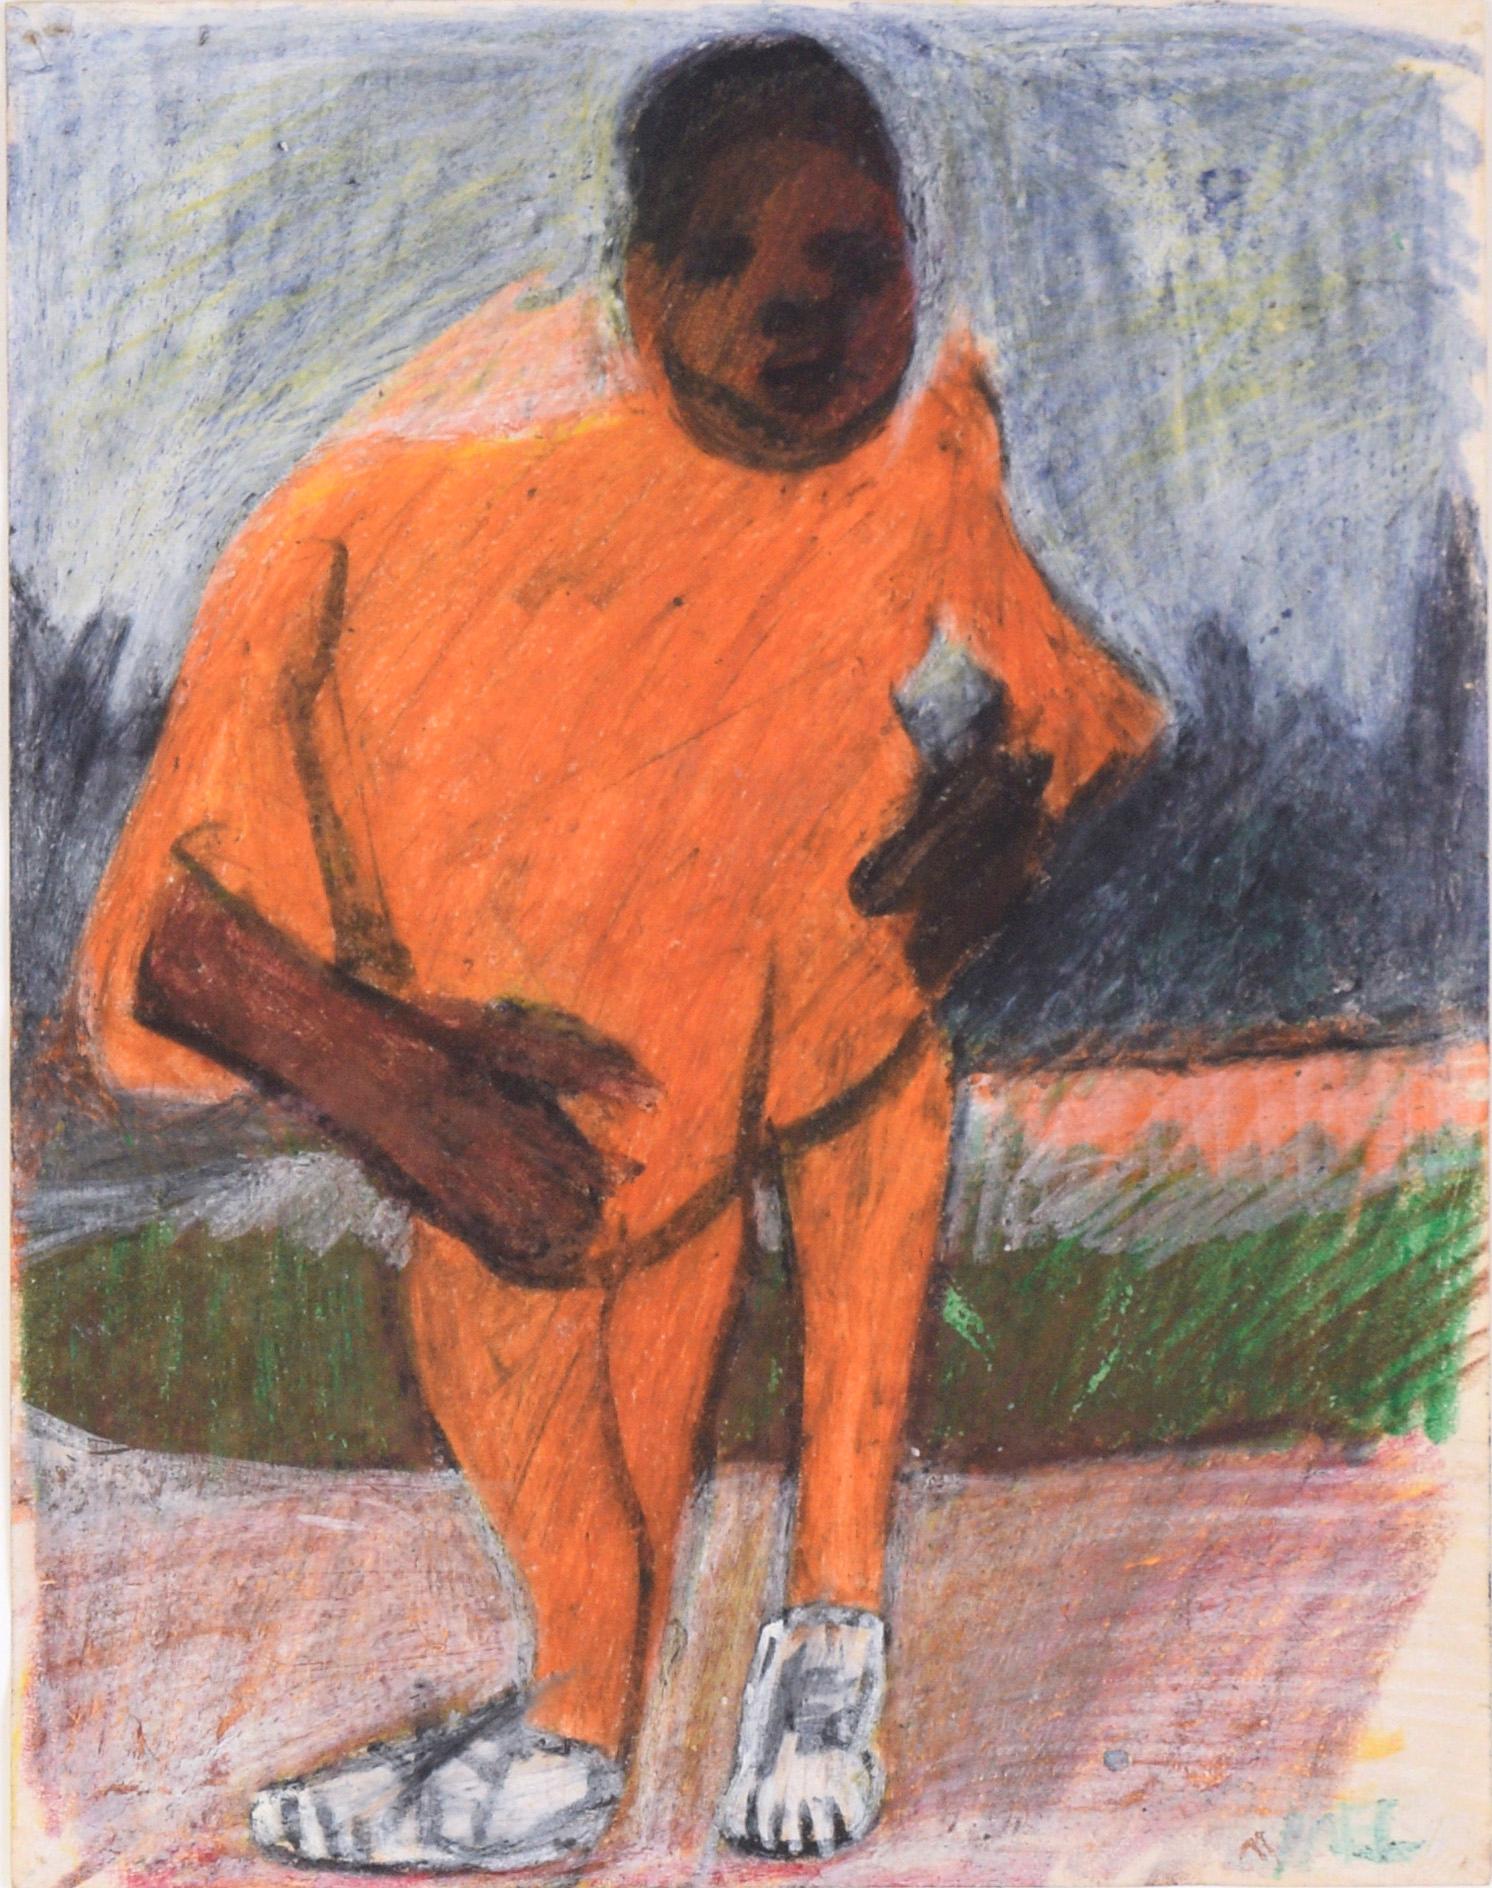 Track Star - Figurative Portrait of an African American Man in Pastel on Paper - Expressionist Art by Unknown